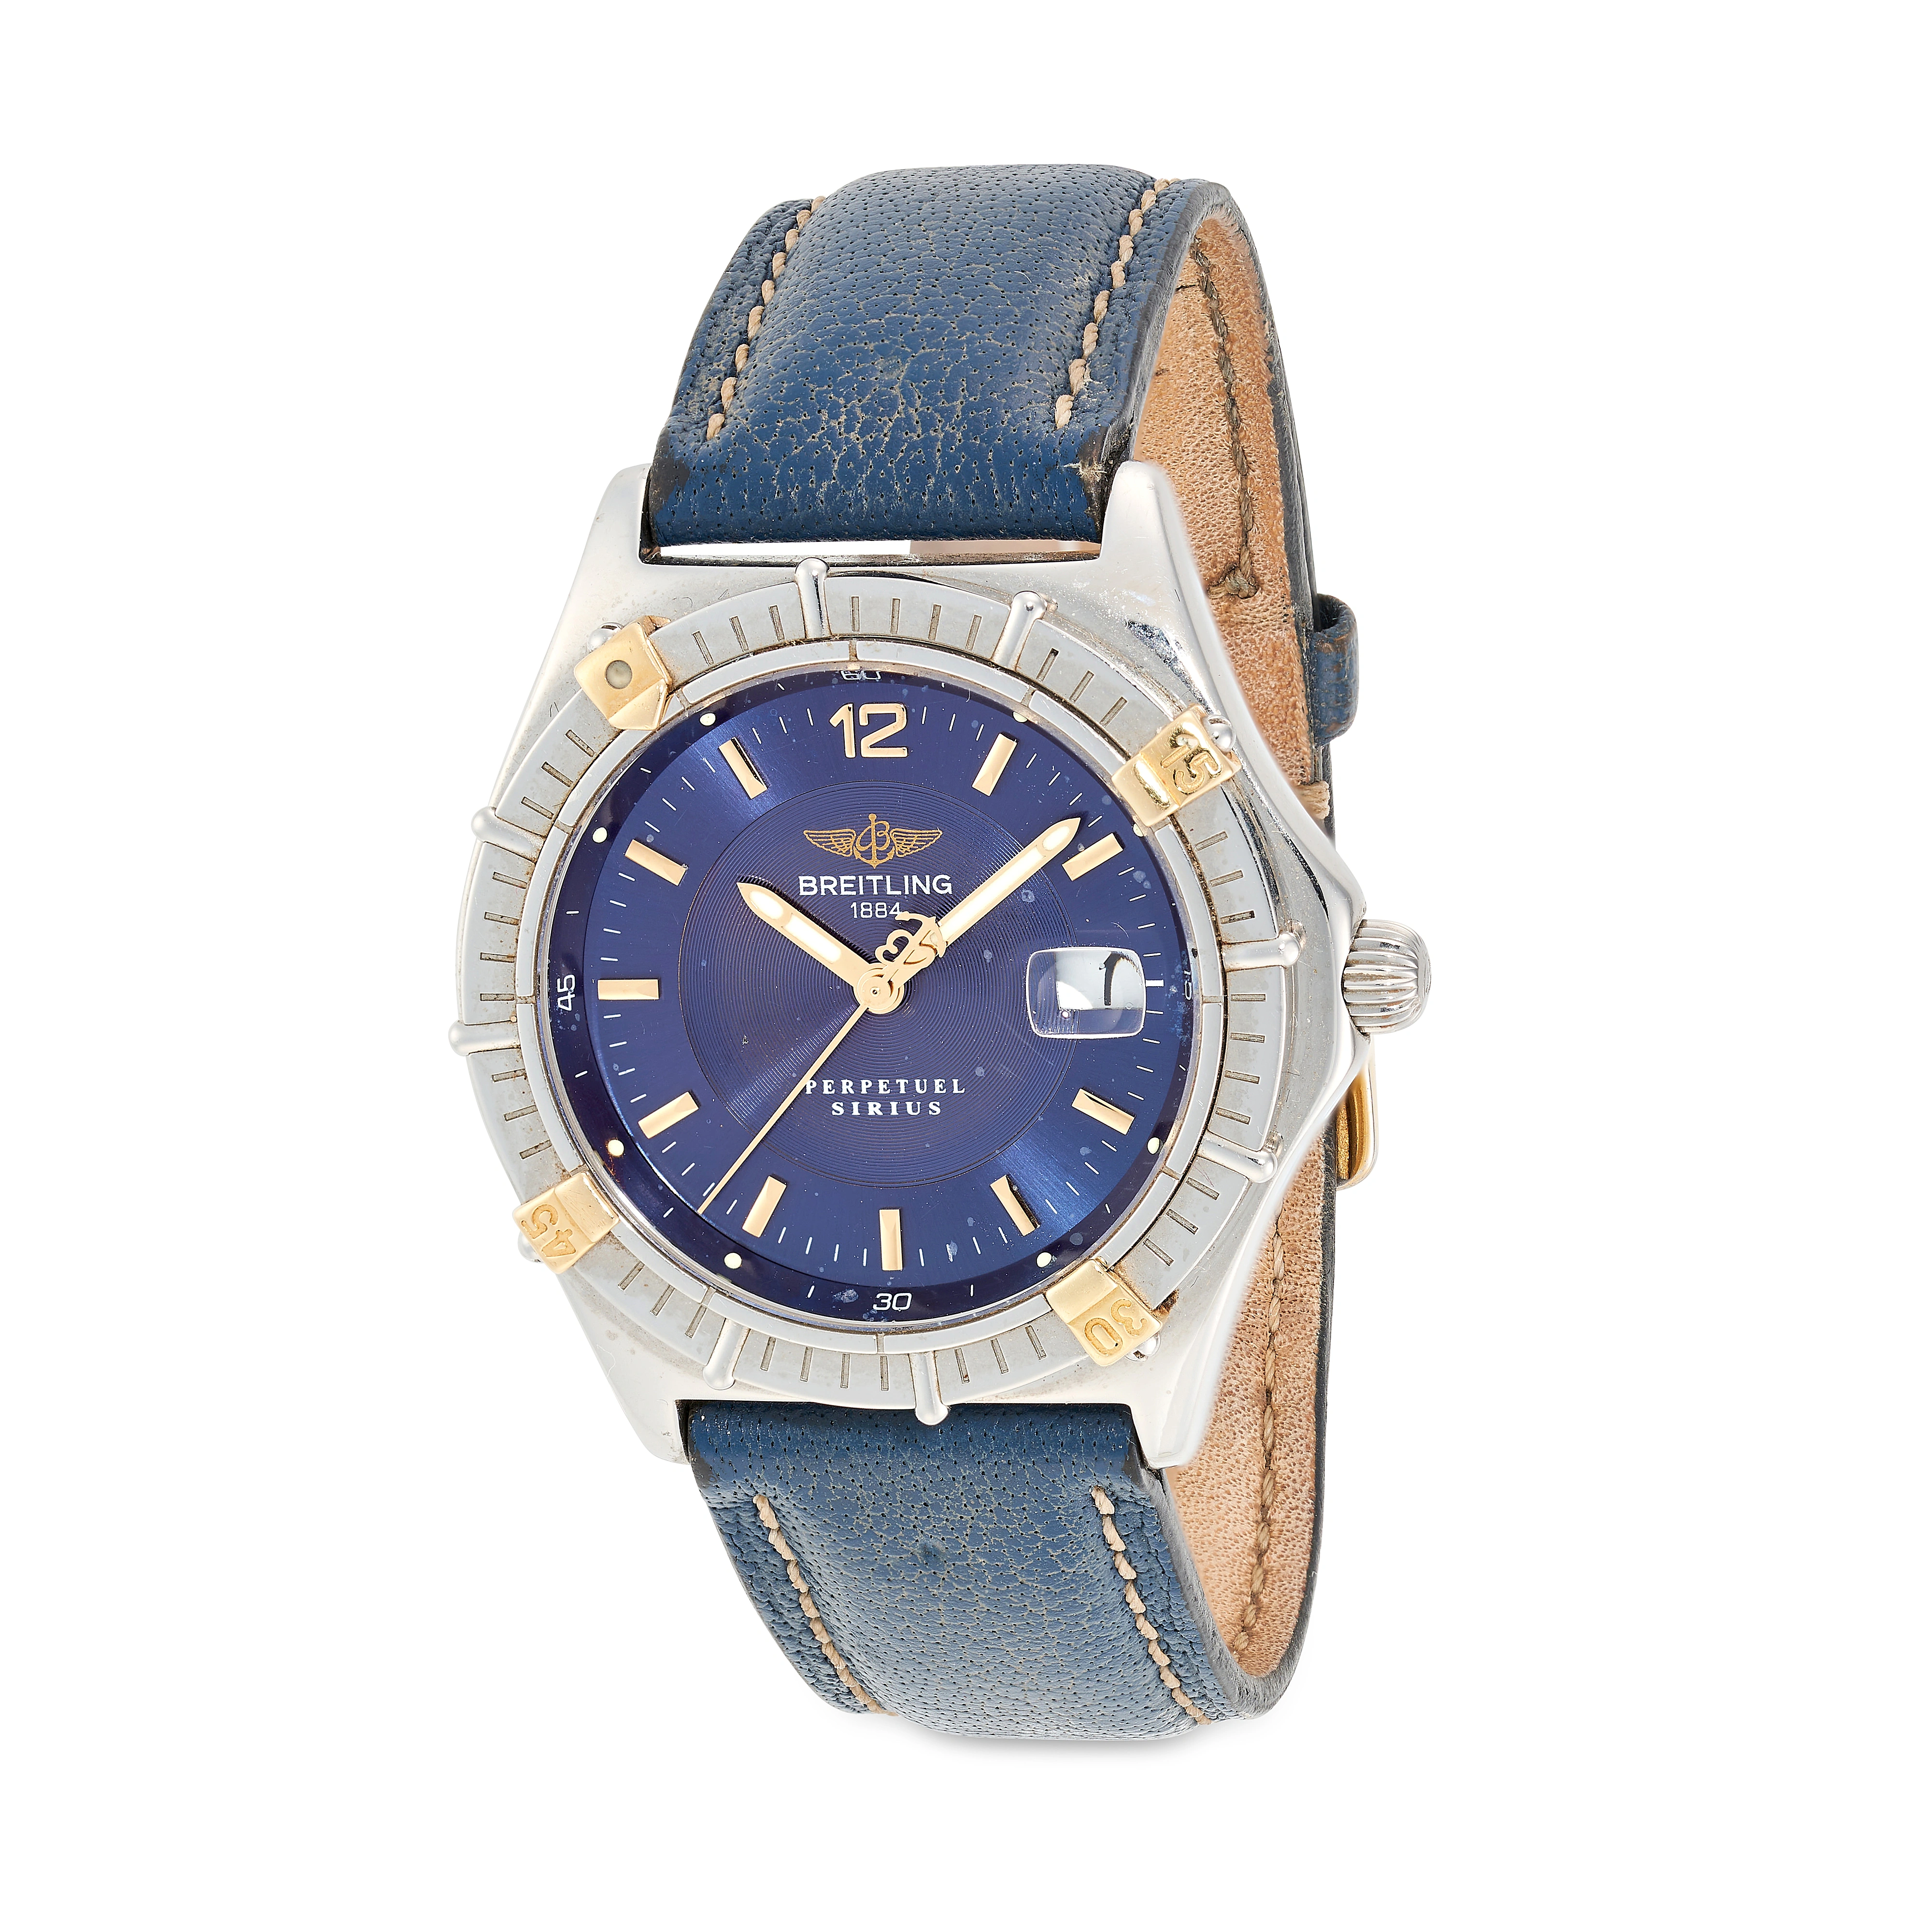 Breitling Perpetual Sirius 36mm Yellow gold and stainless steel Blue